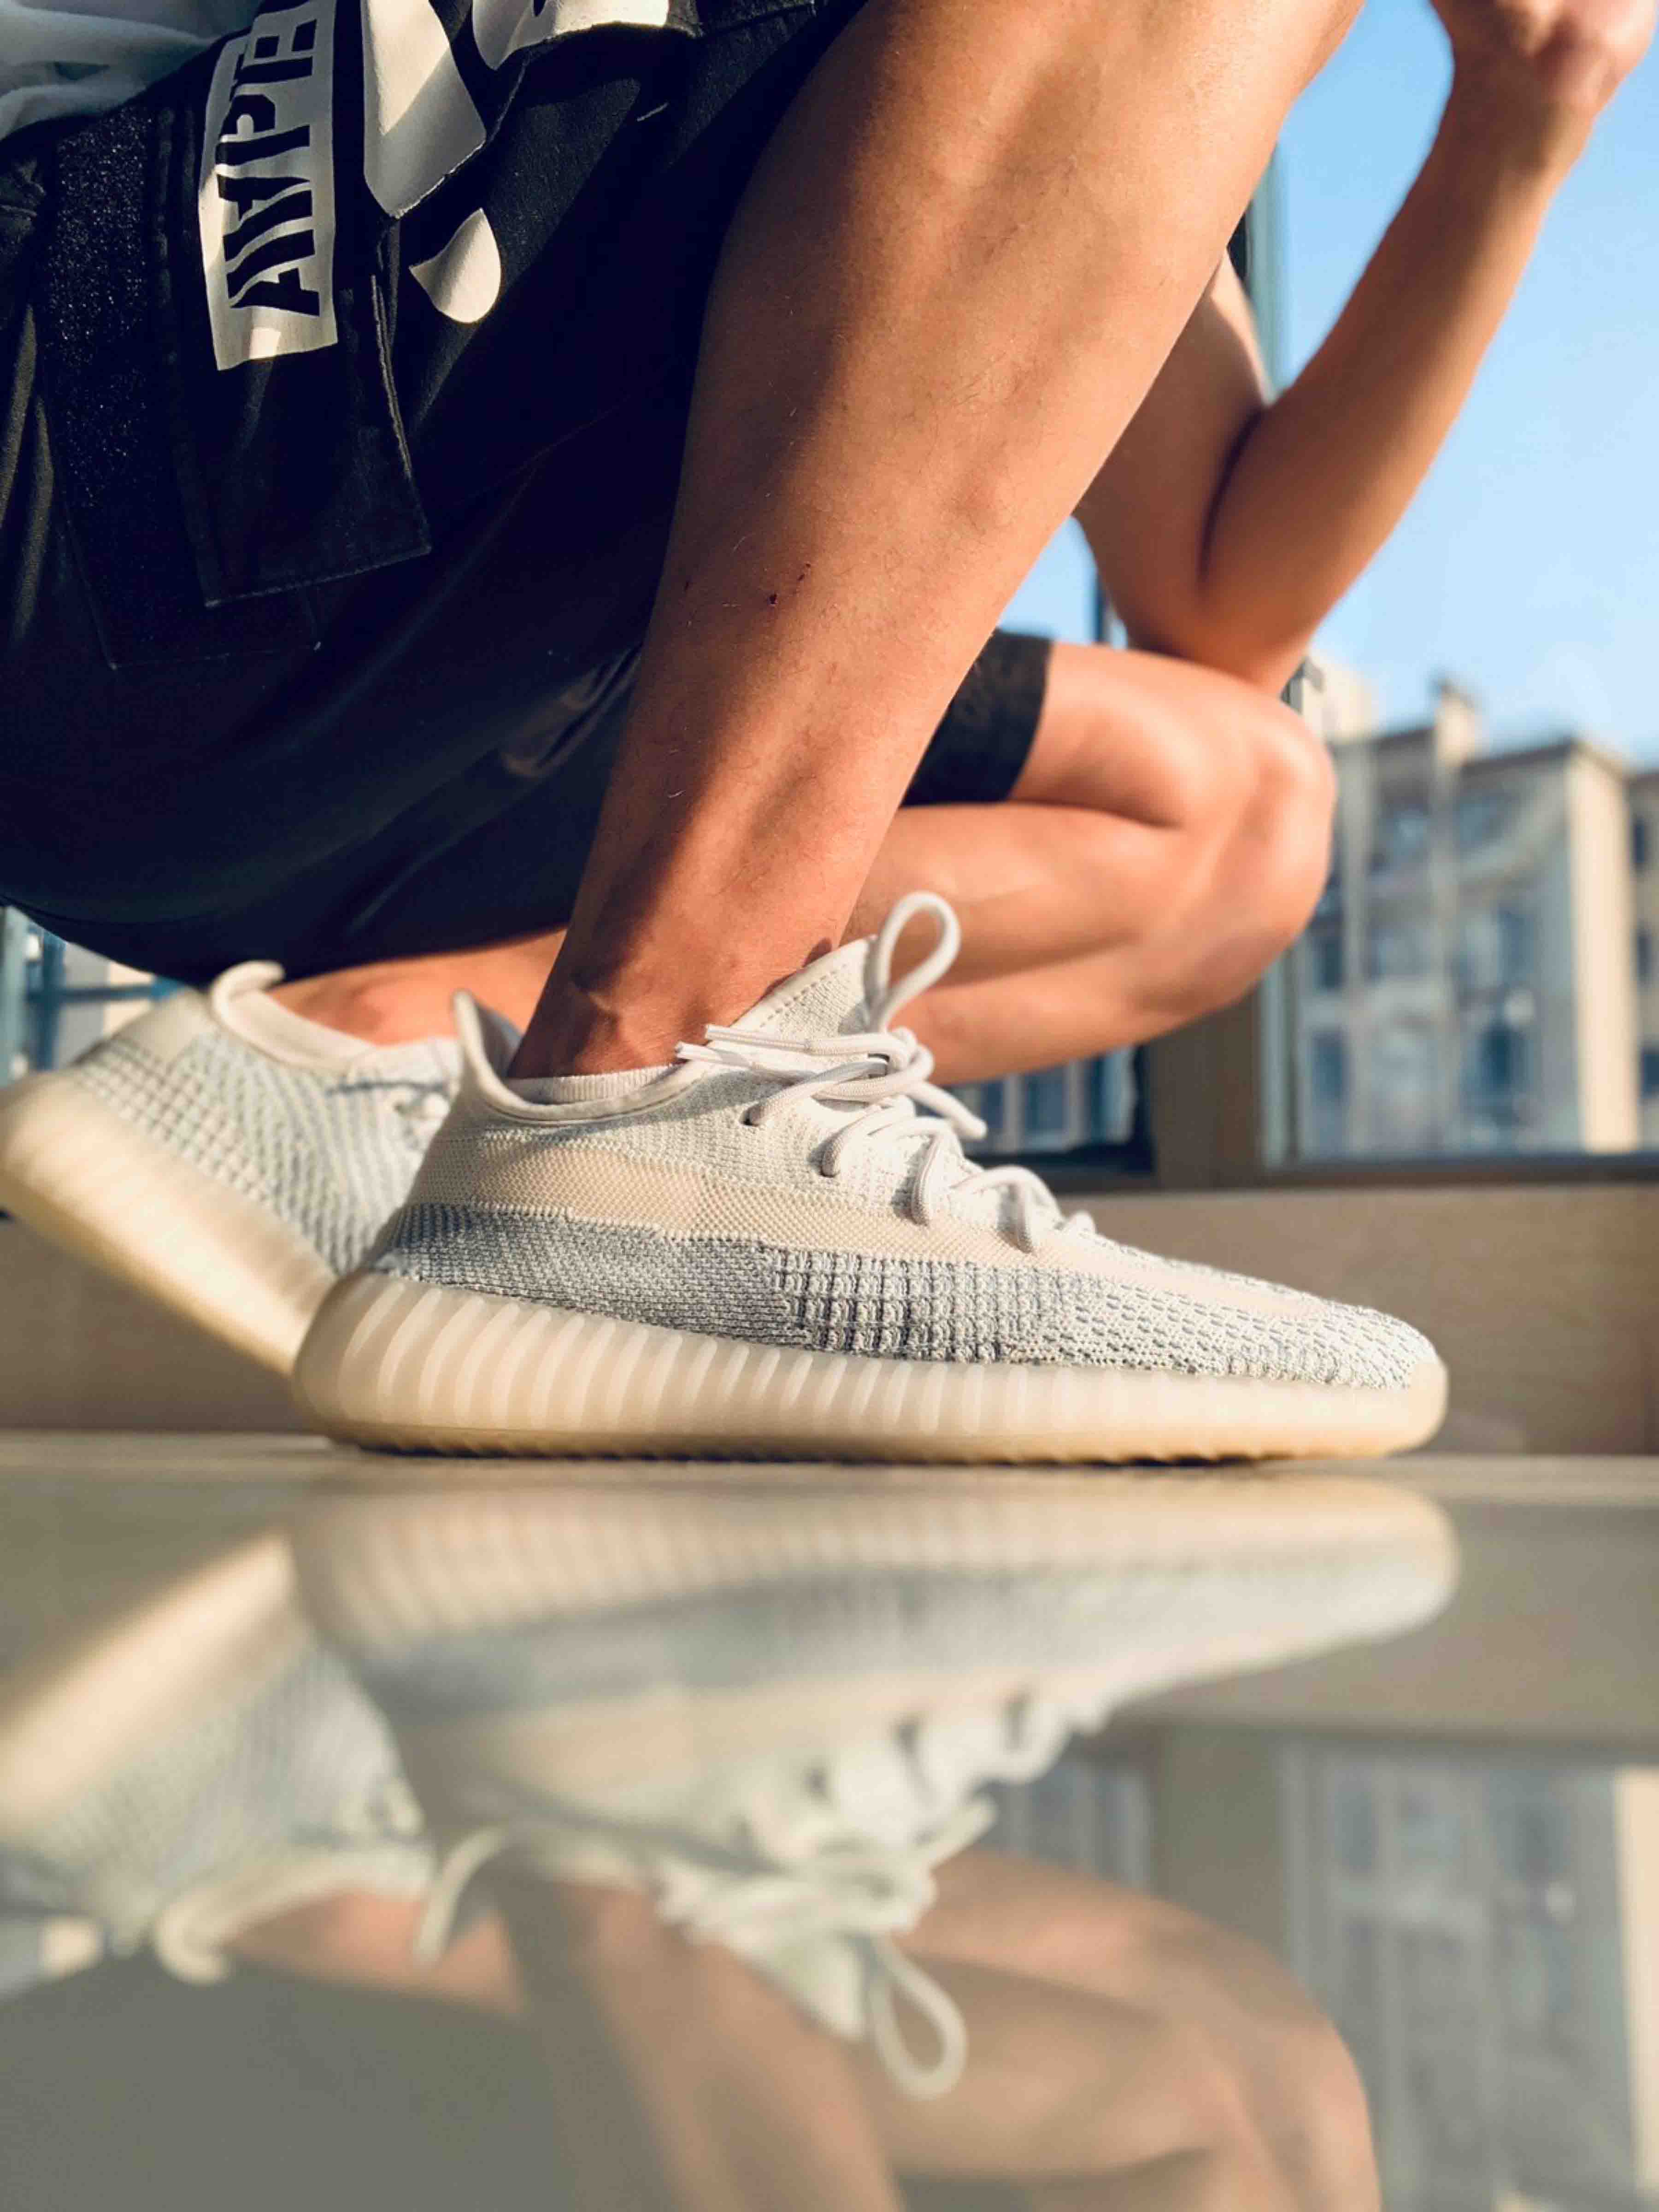 Adidas Yeezy Boost 350 V2 Cloud White Non-Reflective - FW3043